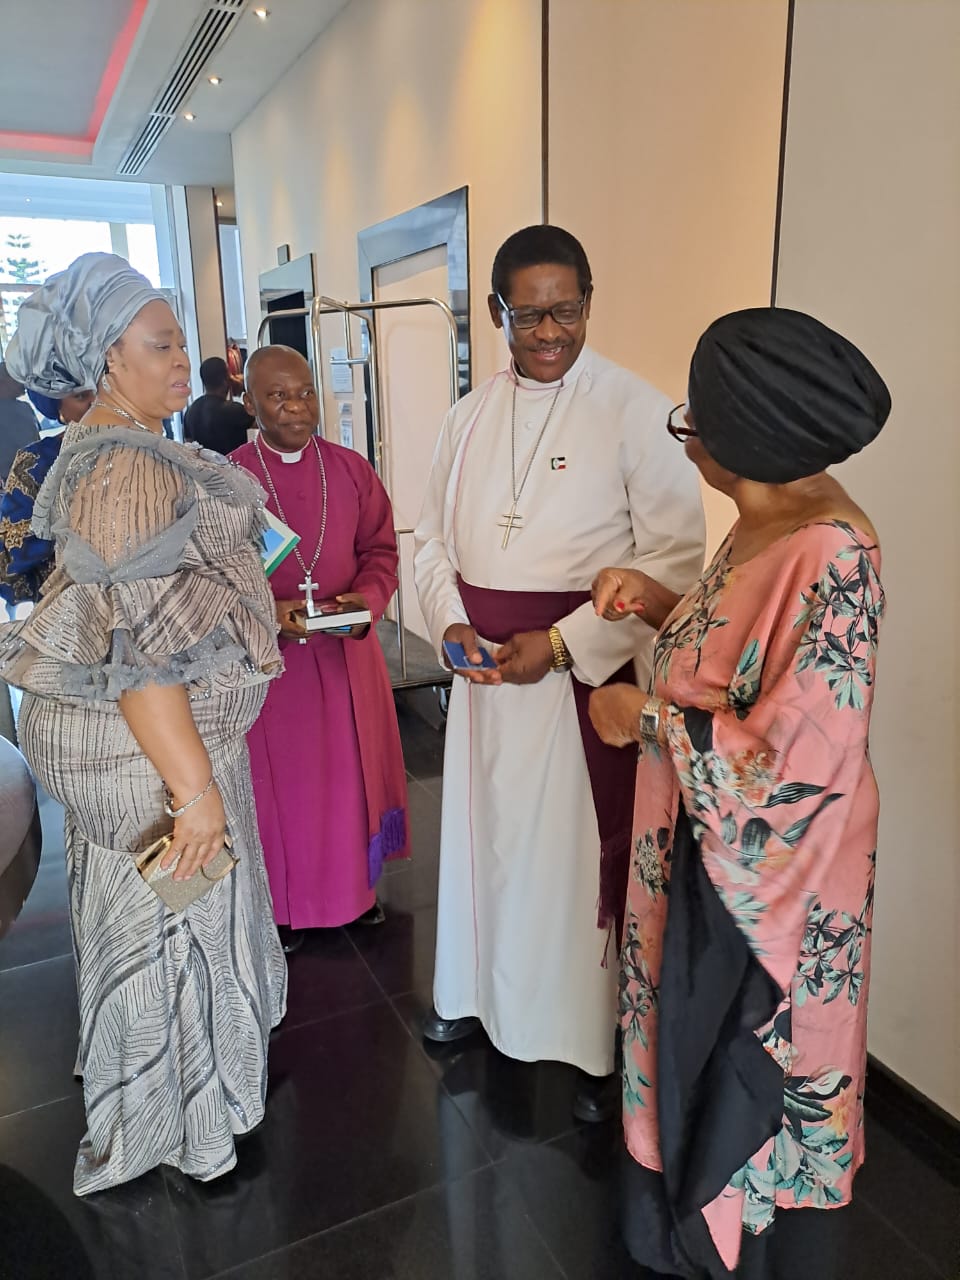 The Primate and Metropolitan of the Church of Nigeria, Anglican Communion together with the Bishop of Owerri Diocese and their lovely wives came visiting at Protea Hotel, Owerri.